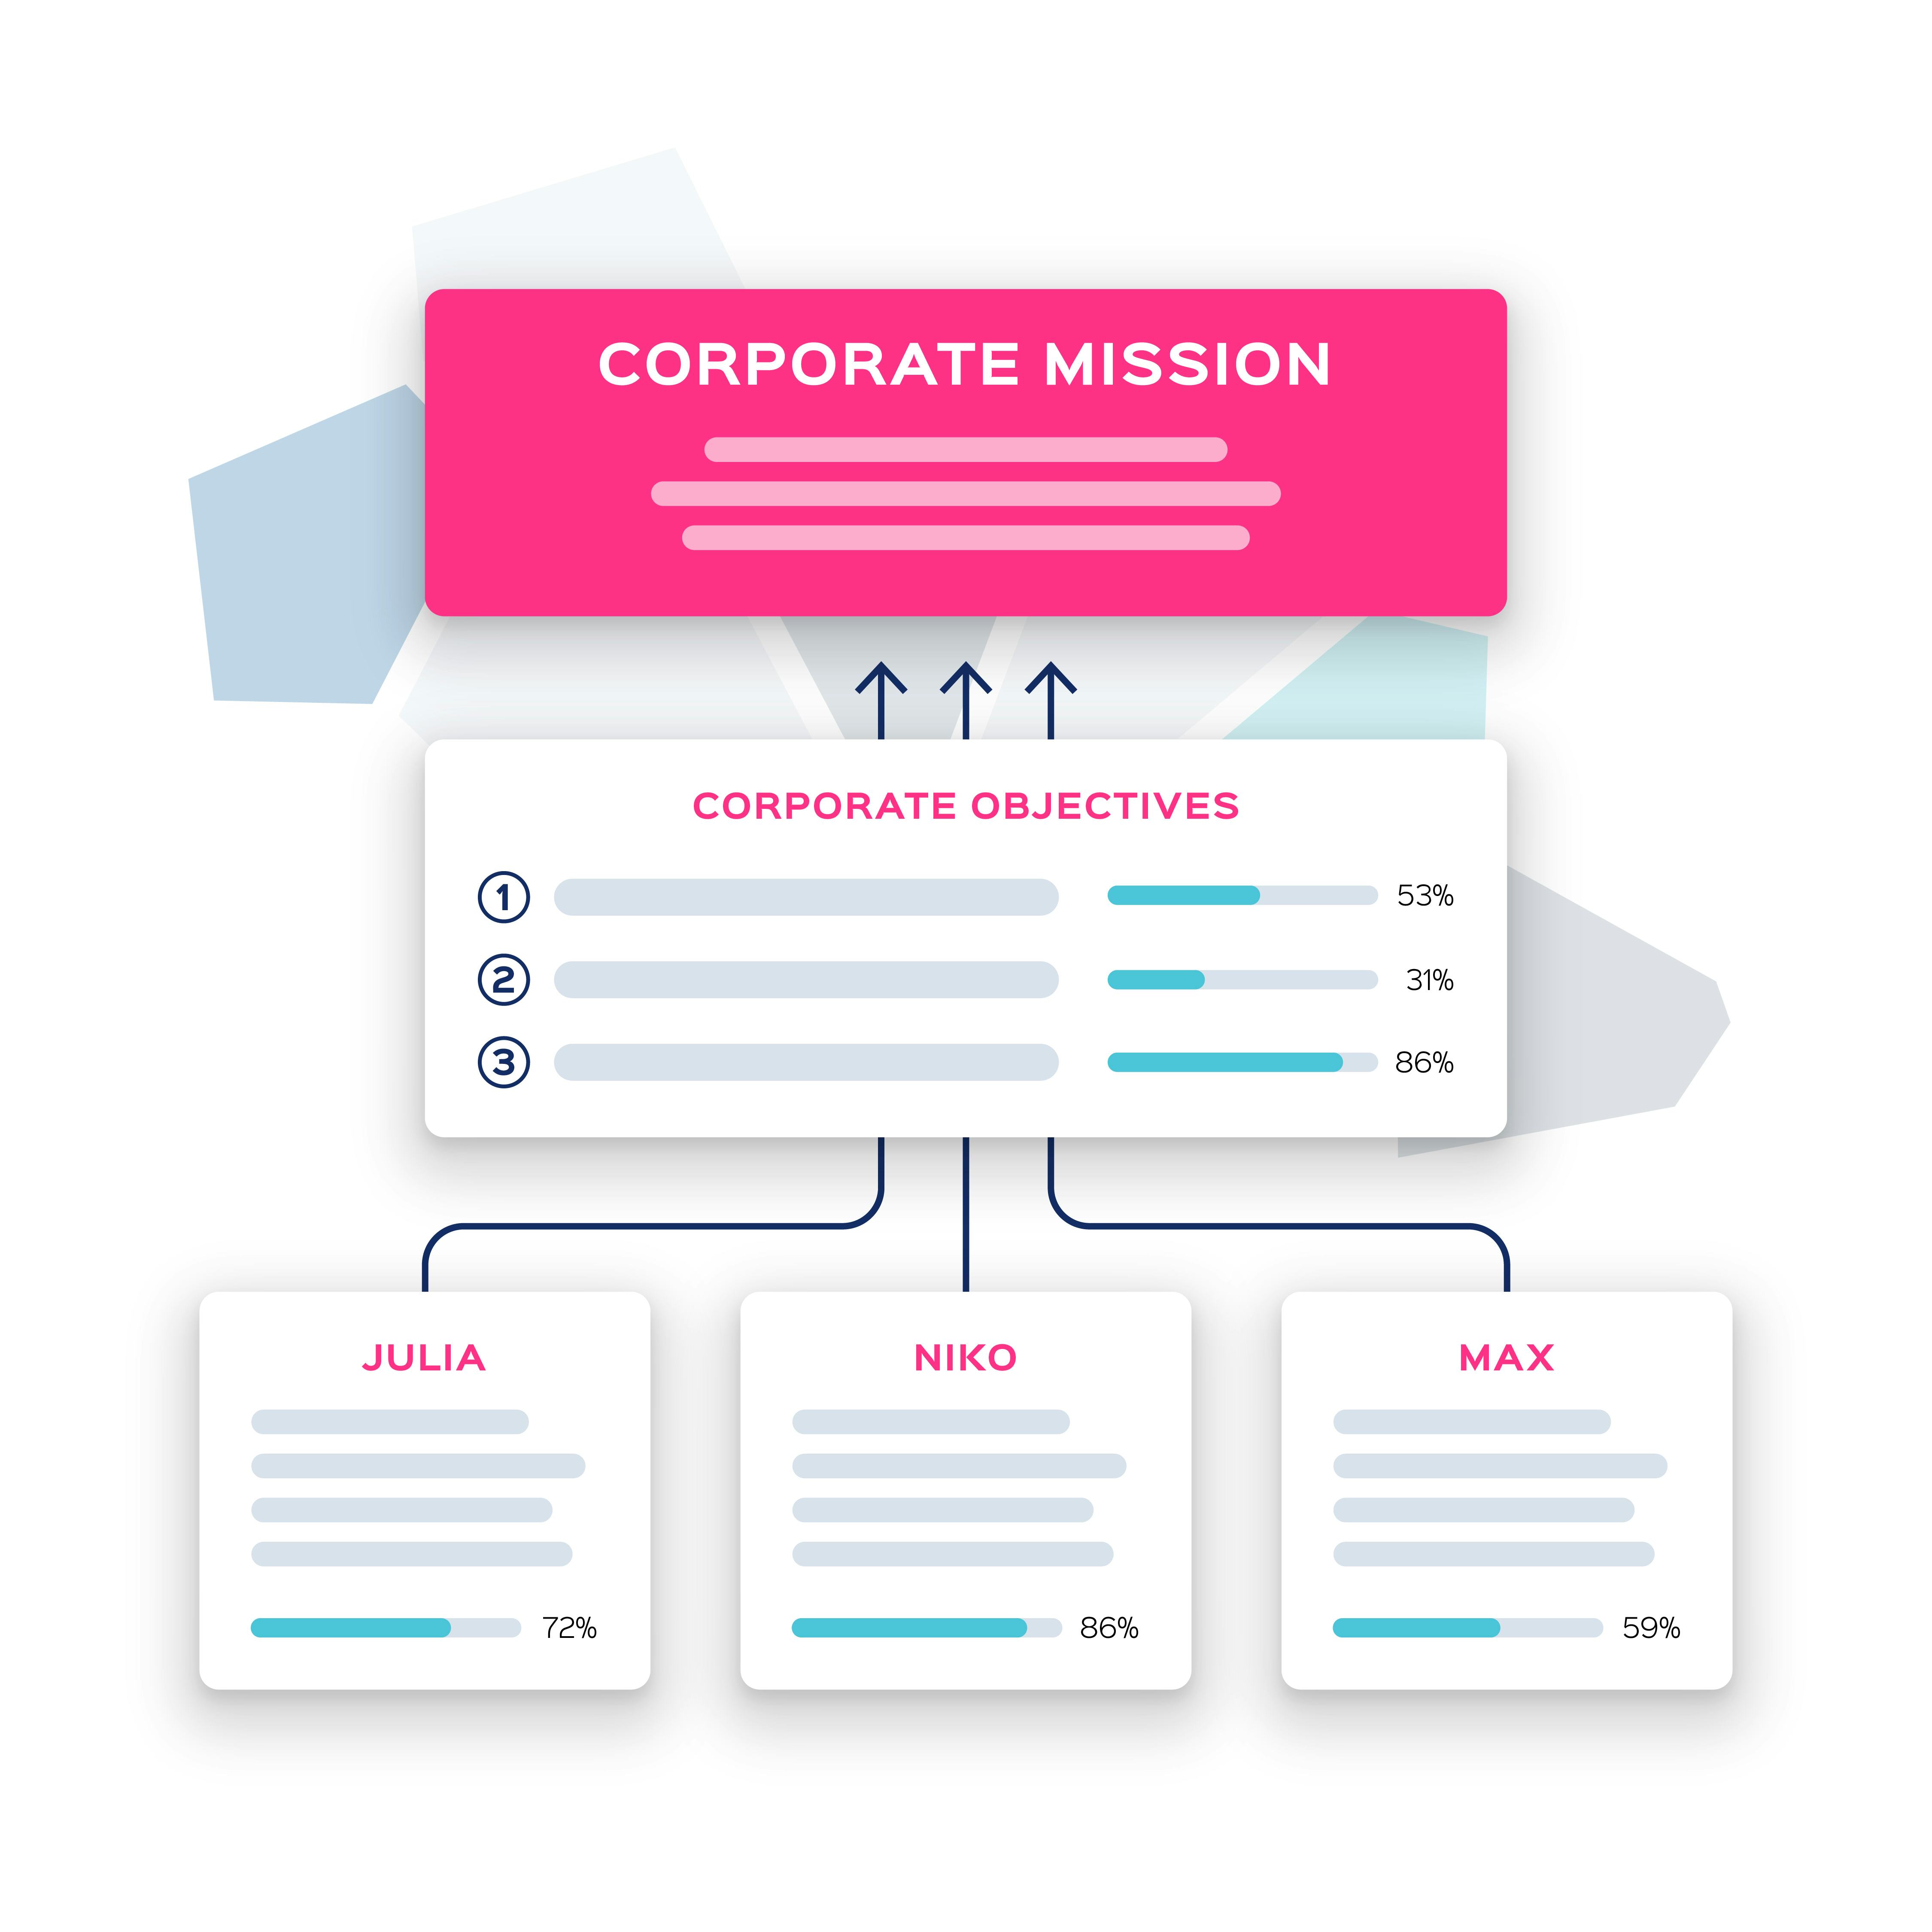 LEADBACKER Software - Set personal objectives and align them with the corporate objectives & corporate mission.